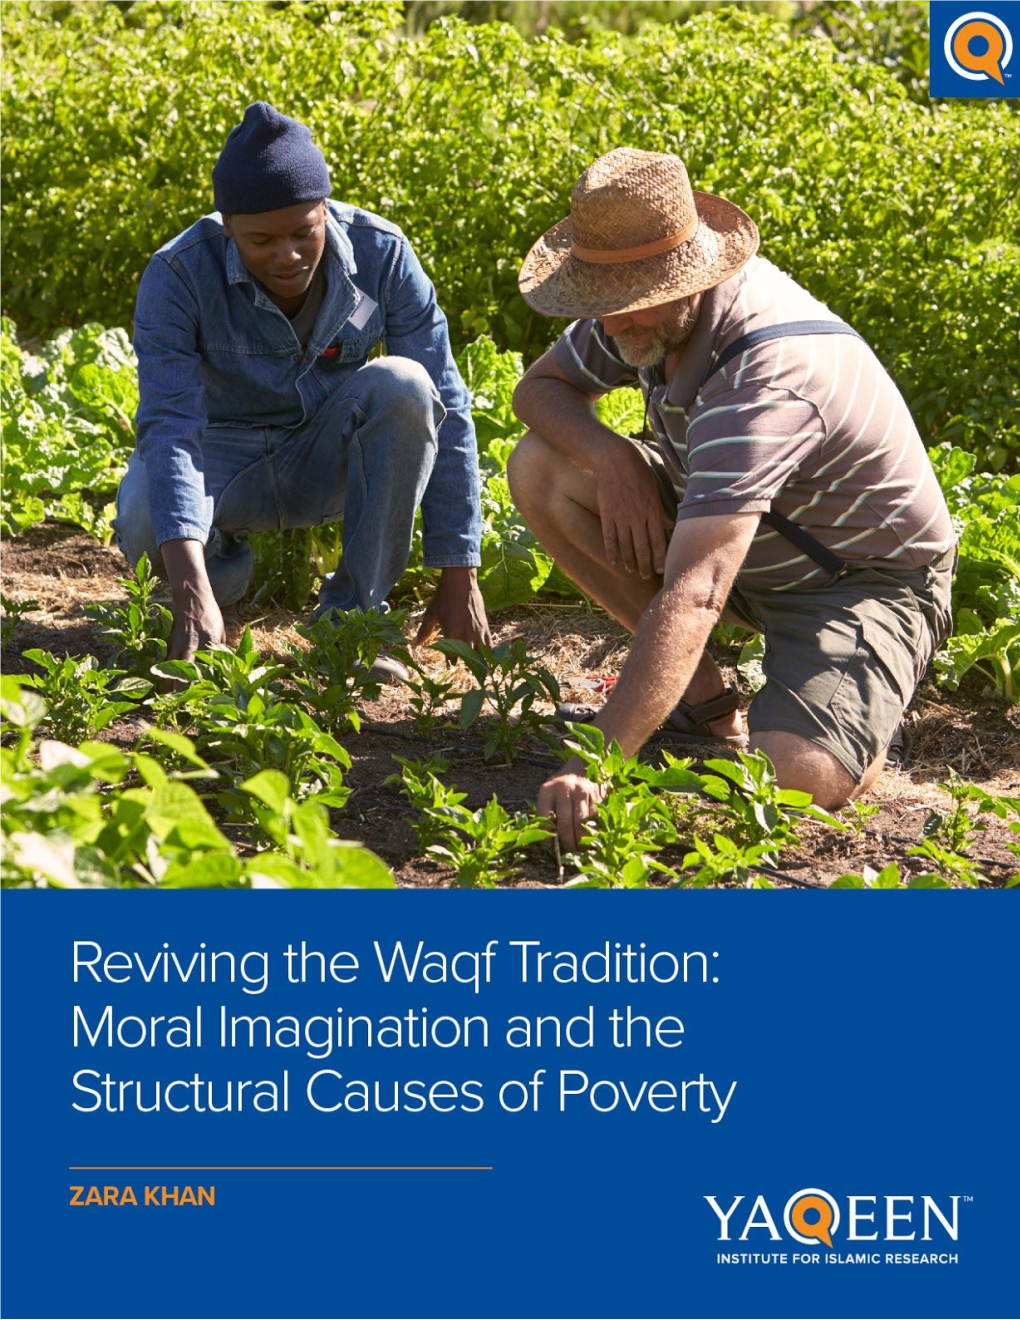 Waqf Tradition: Moral Imagination and the Structural Causes of Poverty